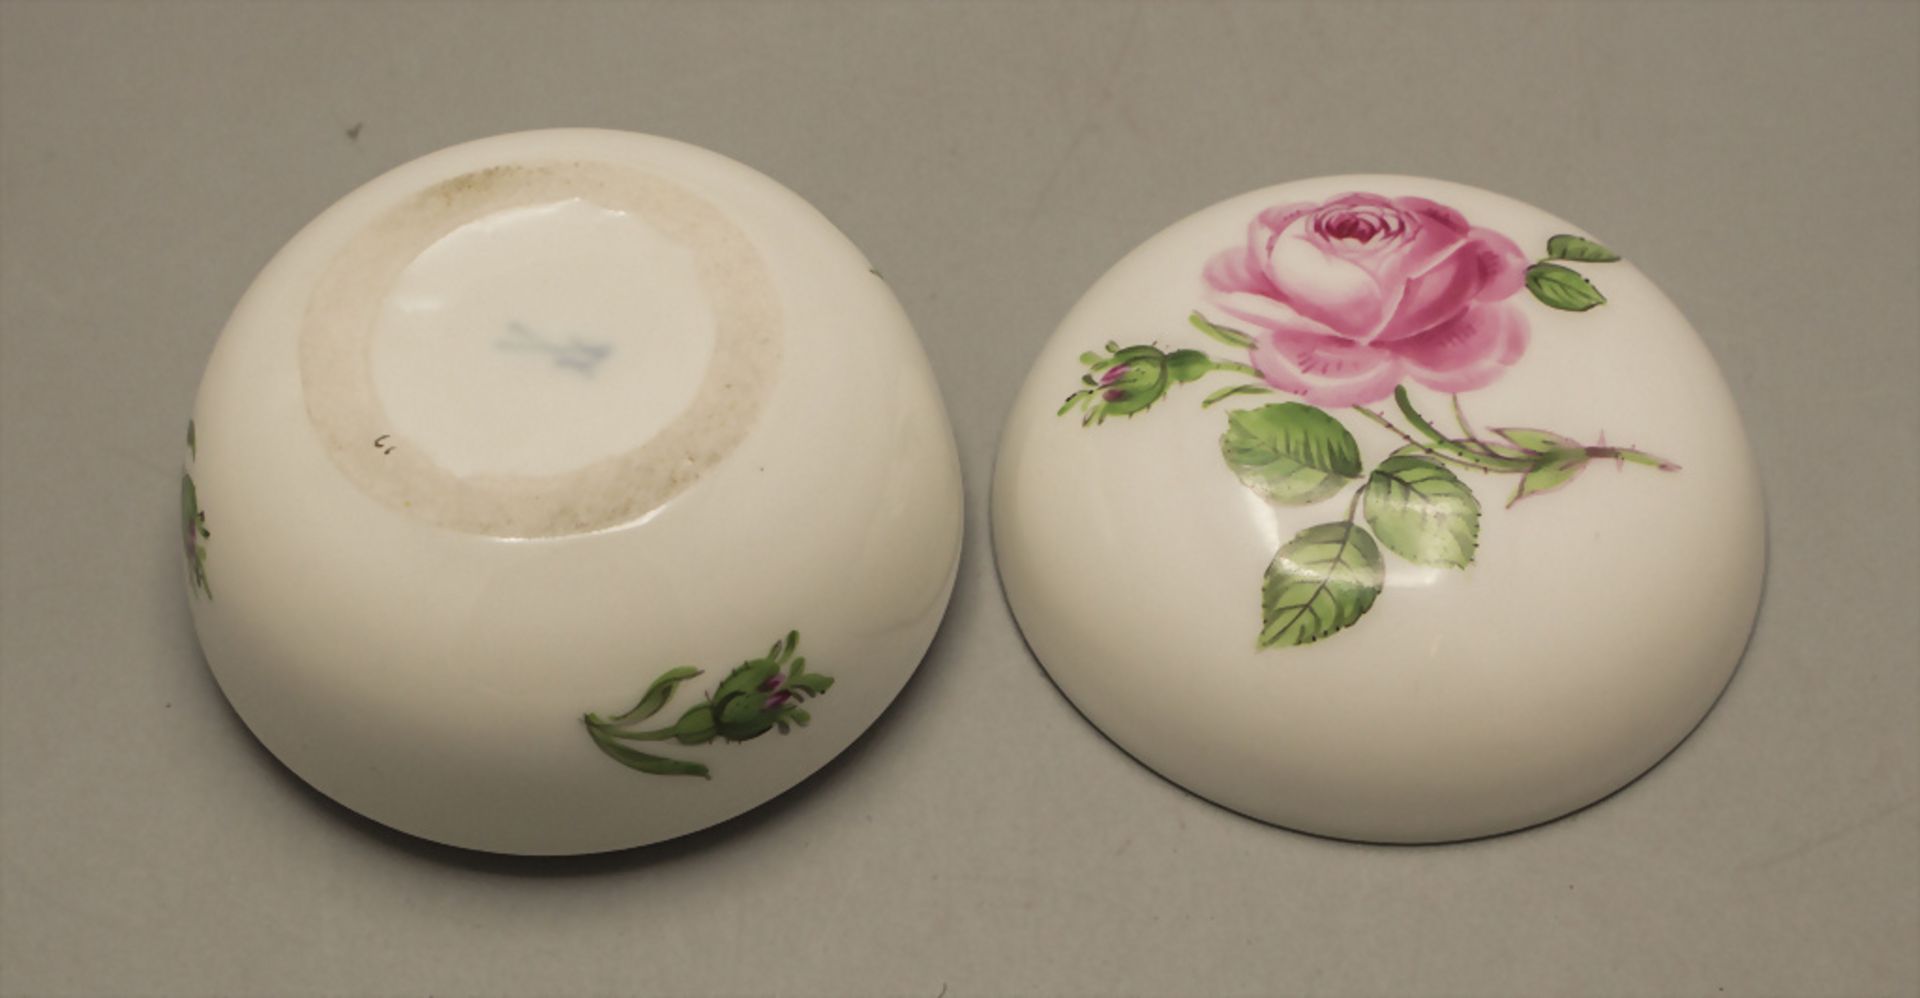 Deckeldose mit Rose / A lidded box with a rose, Meissen, Anfang 20. Jh. - Image 3 of 3